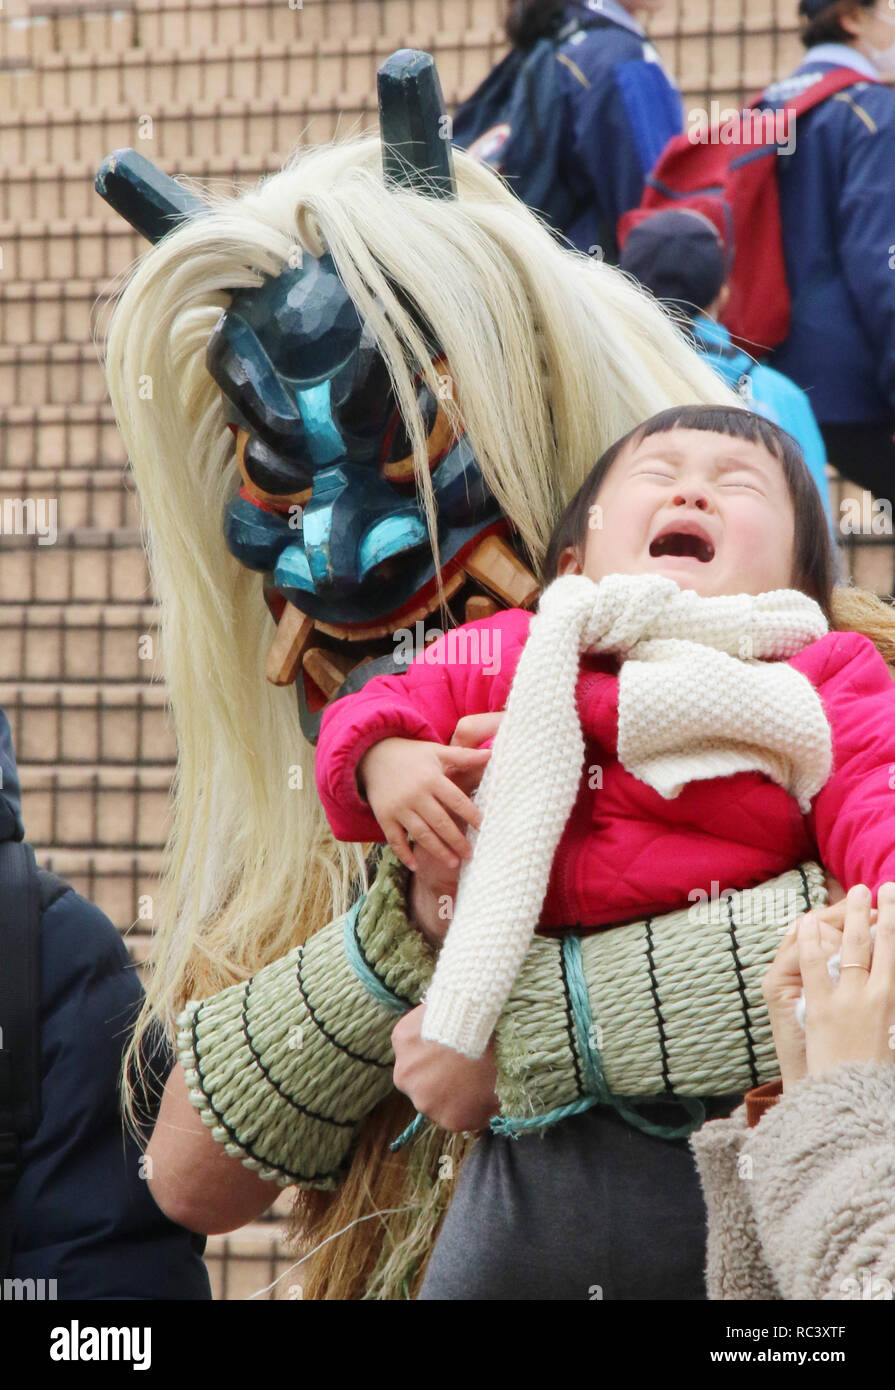 Yokohama, Japan. 12th Jan, 2019. A demon masked man called Namahage from Akita prefecture, northern Japan holds a crying baby during a promotional event for Akita at the Hakkeijima Sea Paradise aquarium in Yokohama, suburban Tokyo on Saturday, January 12, 2019. Japanese folk rituals including Namahage were approved for addition to UNESCOs Intangible Cultural Heritage list last year. Credit: Yoshio Tsunoda/AFLO/Alamy Live News Stock Photo